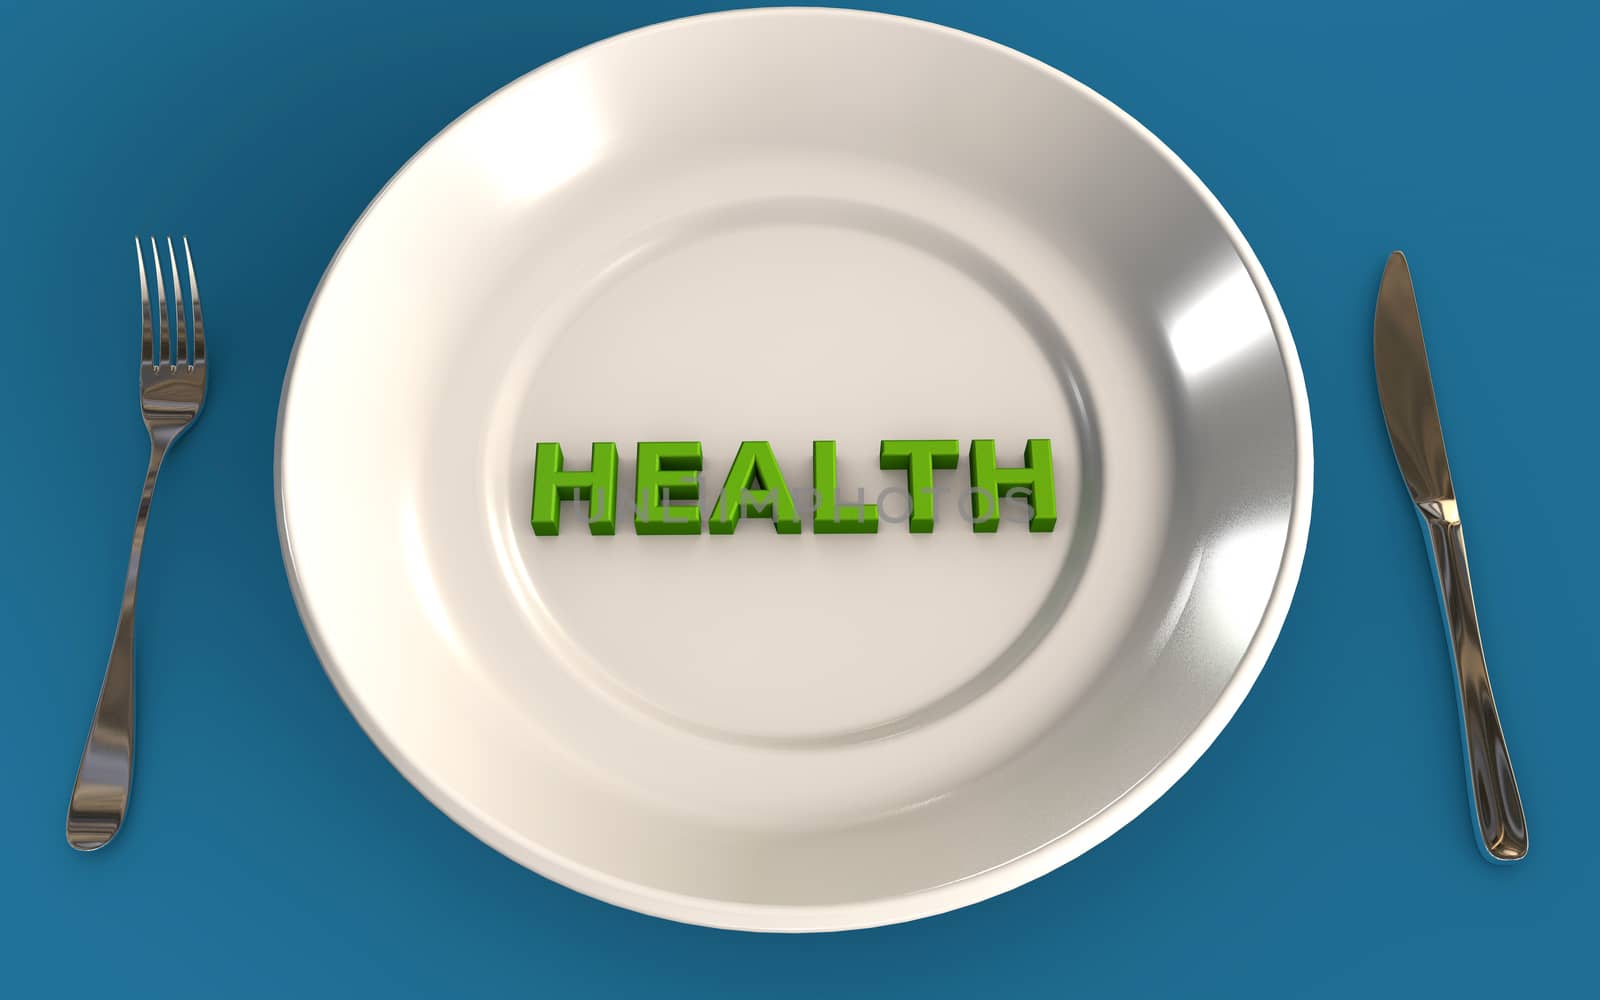 eating healthy concept 3d rendered isolated on blue background by F1b0nacci